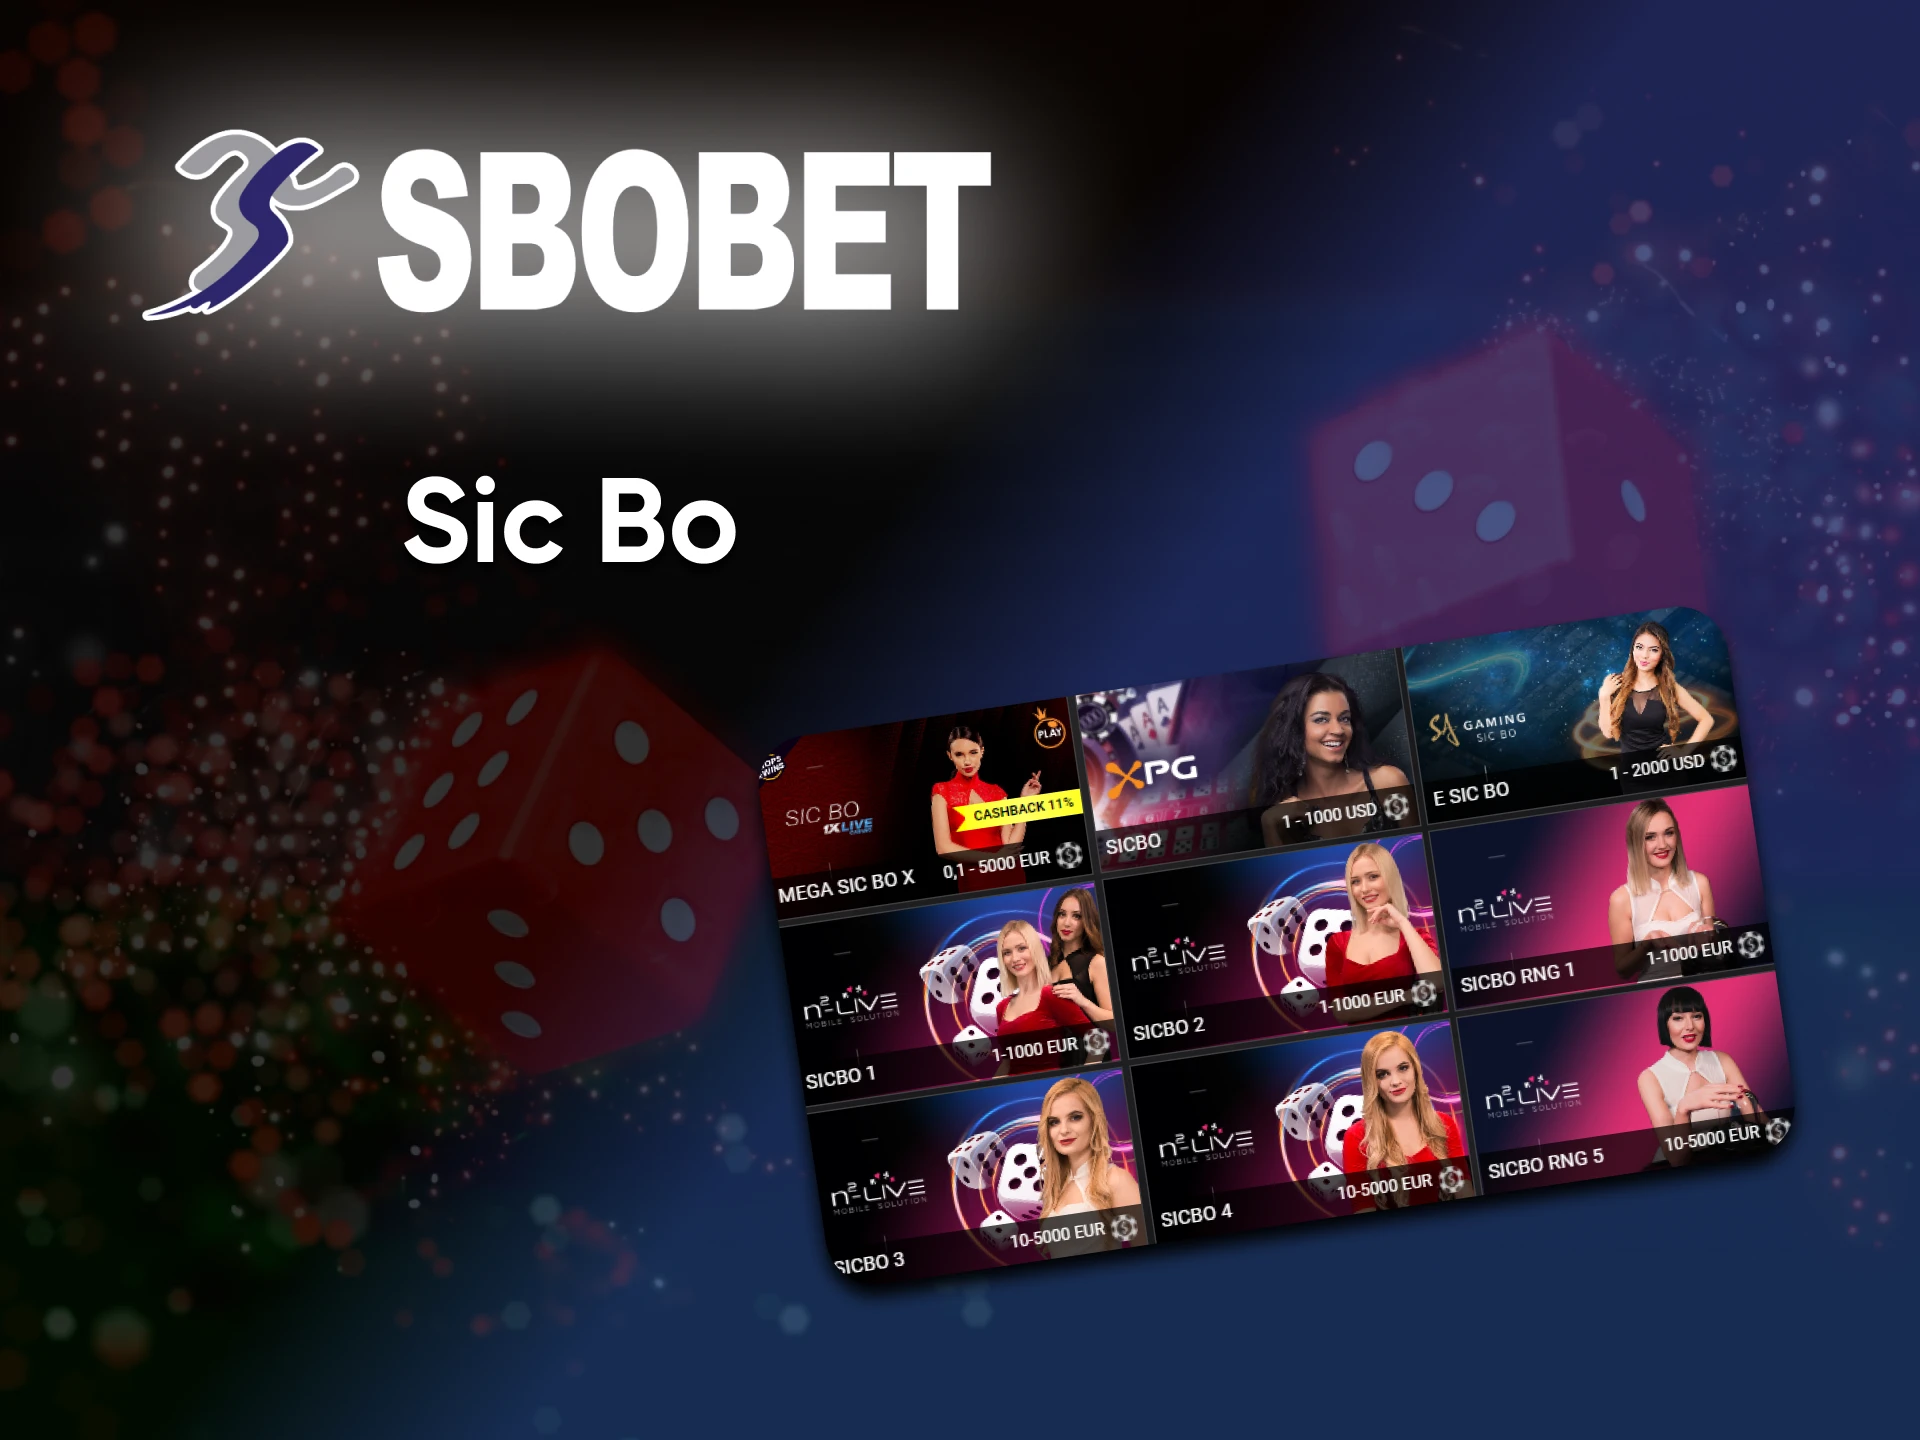 On the Sbobet site, you can play games like Sic Bo.